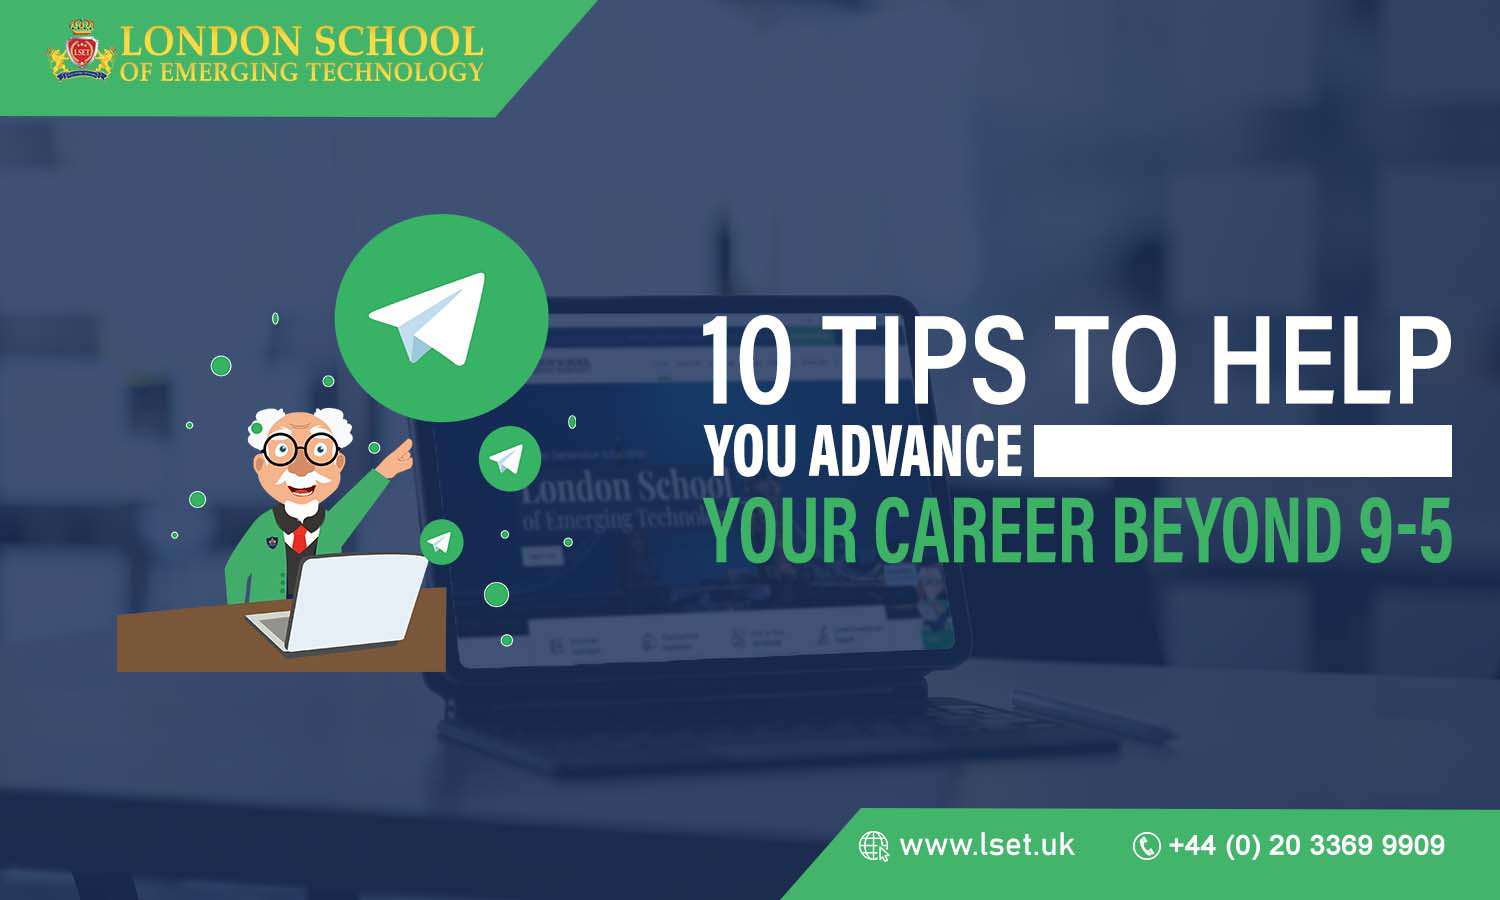 10 Tips to Help You Advance Your Career Beyond 9-5